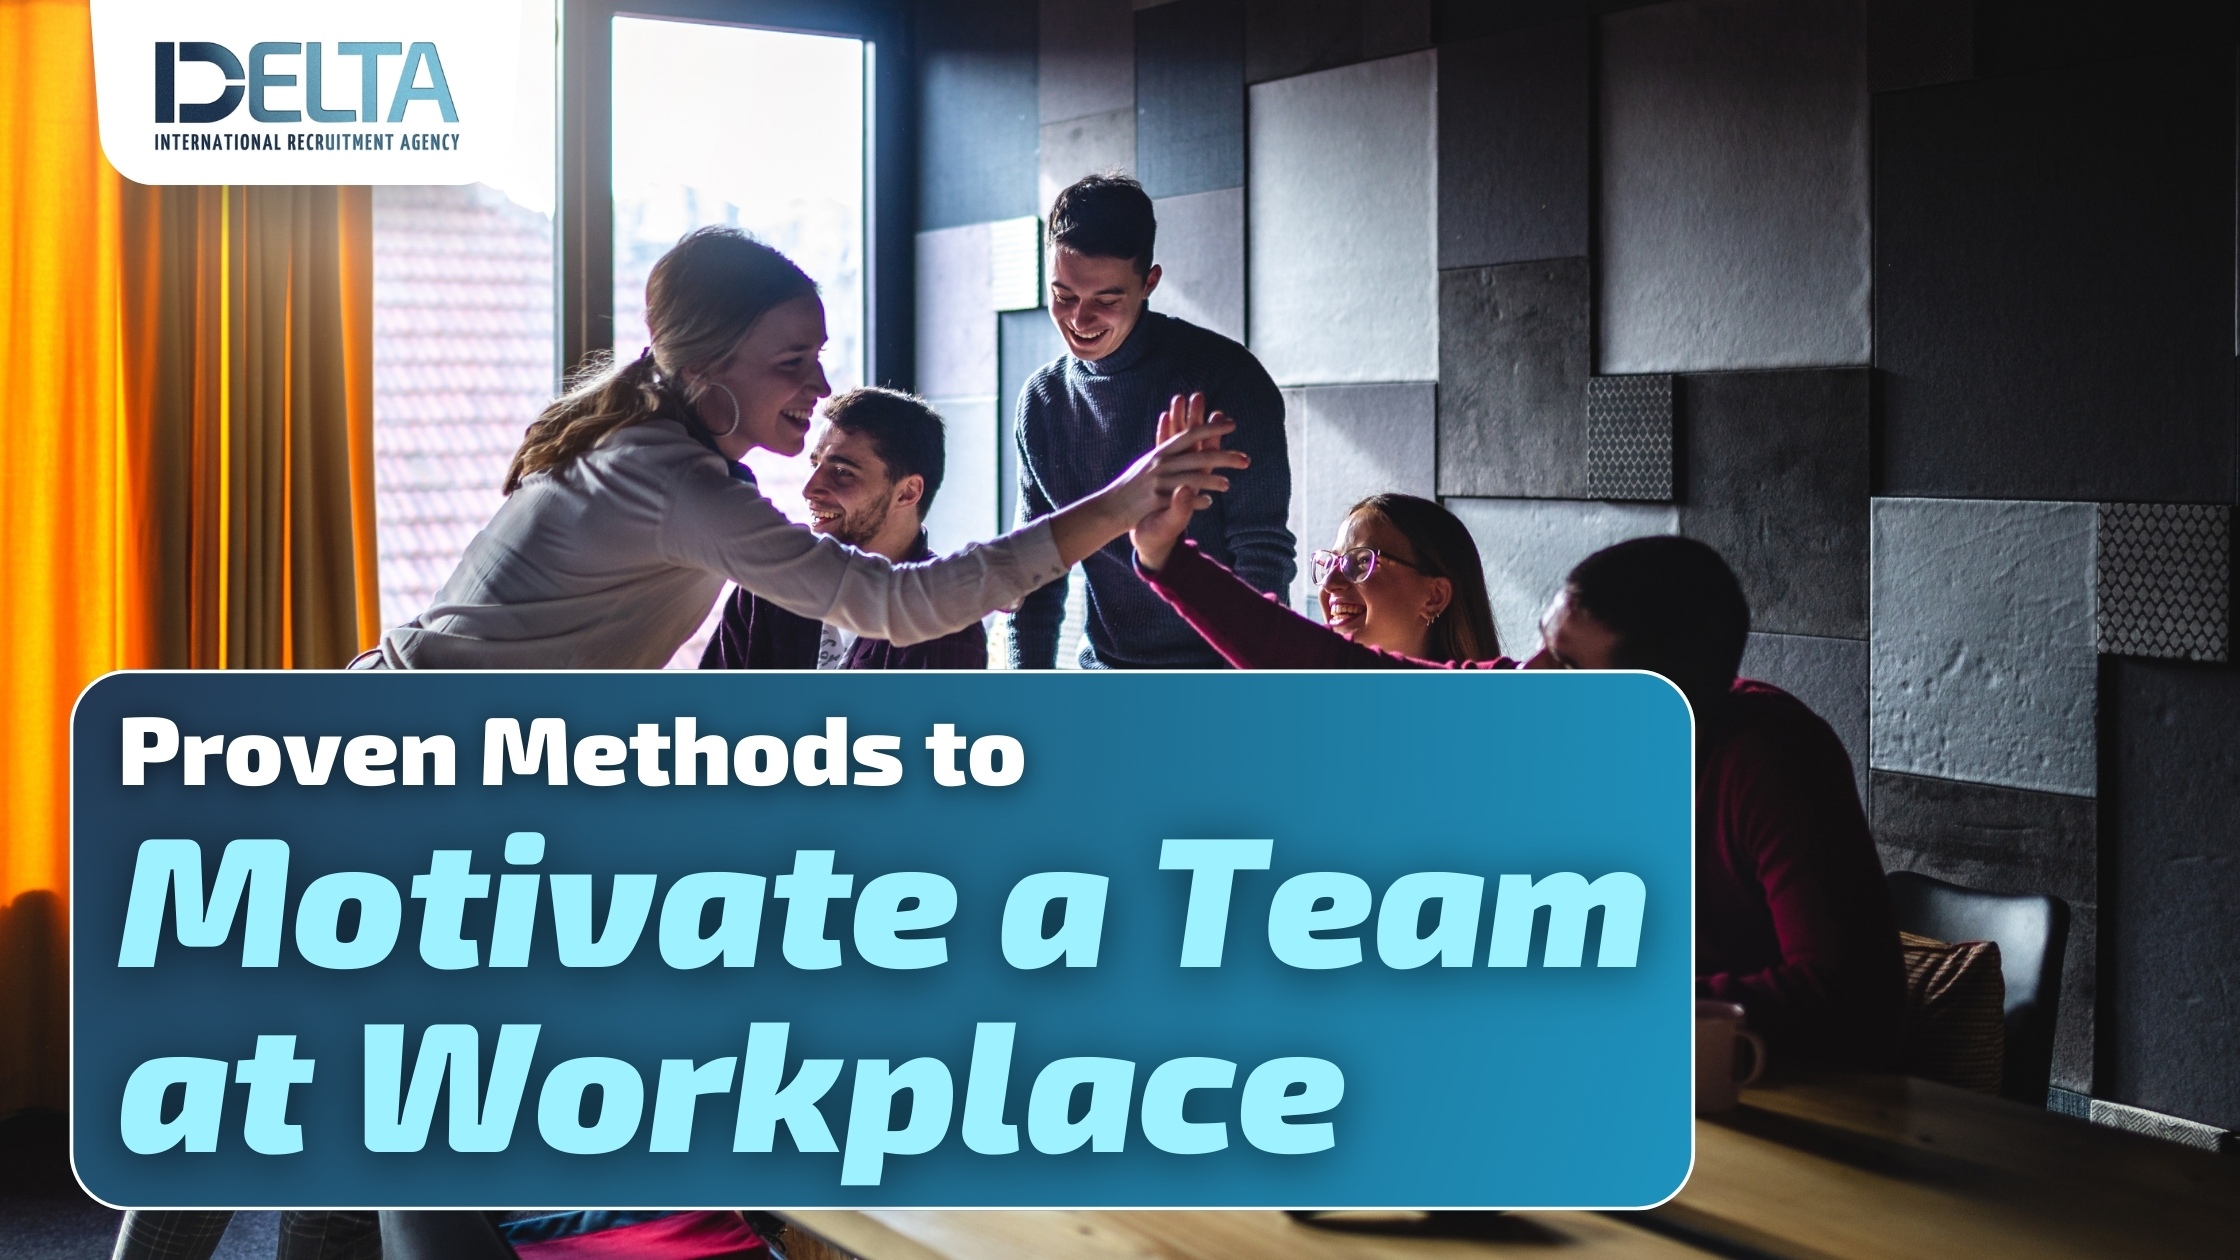 Proven Methods to Motivate a Team at Workplace